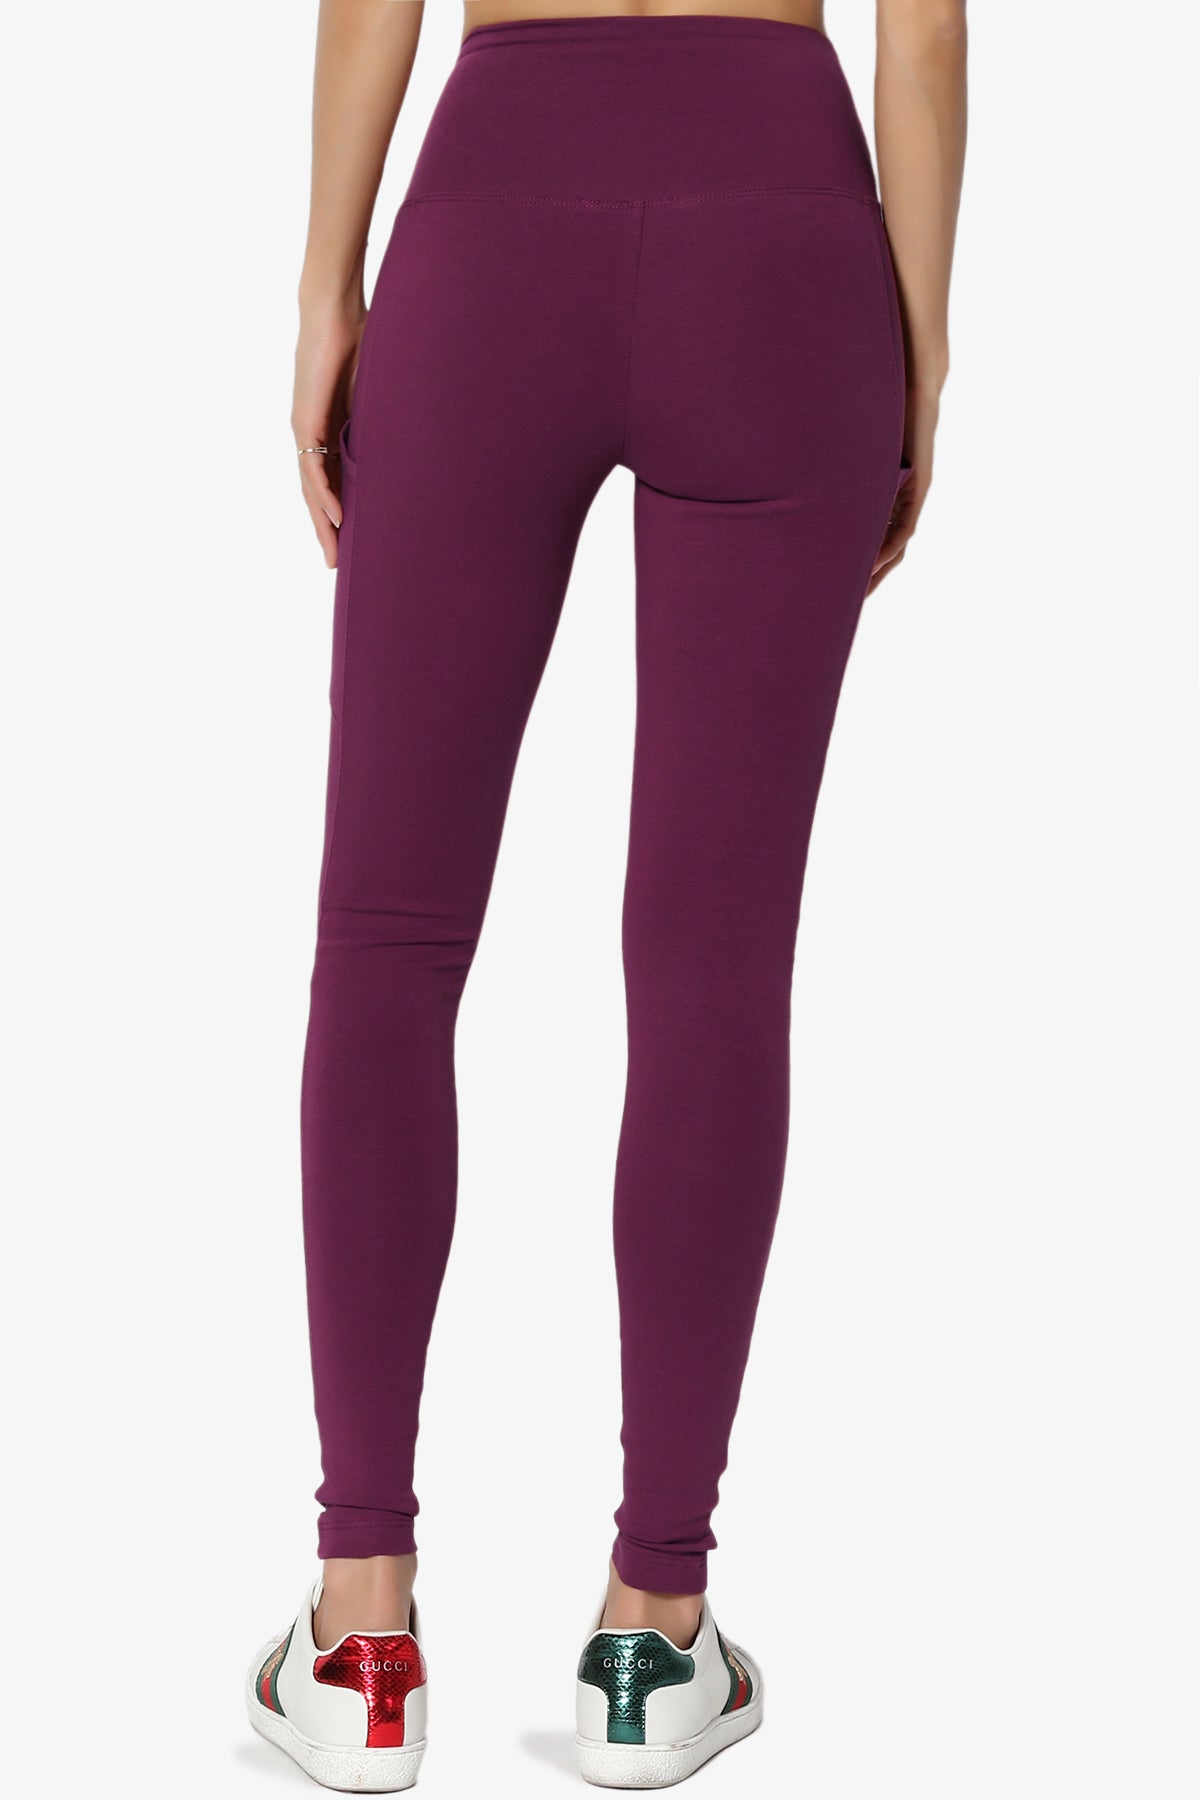 Ansley Luxe Cotton Leggings with Pockets DARK PLUM_2